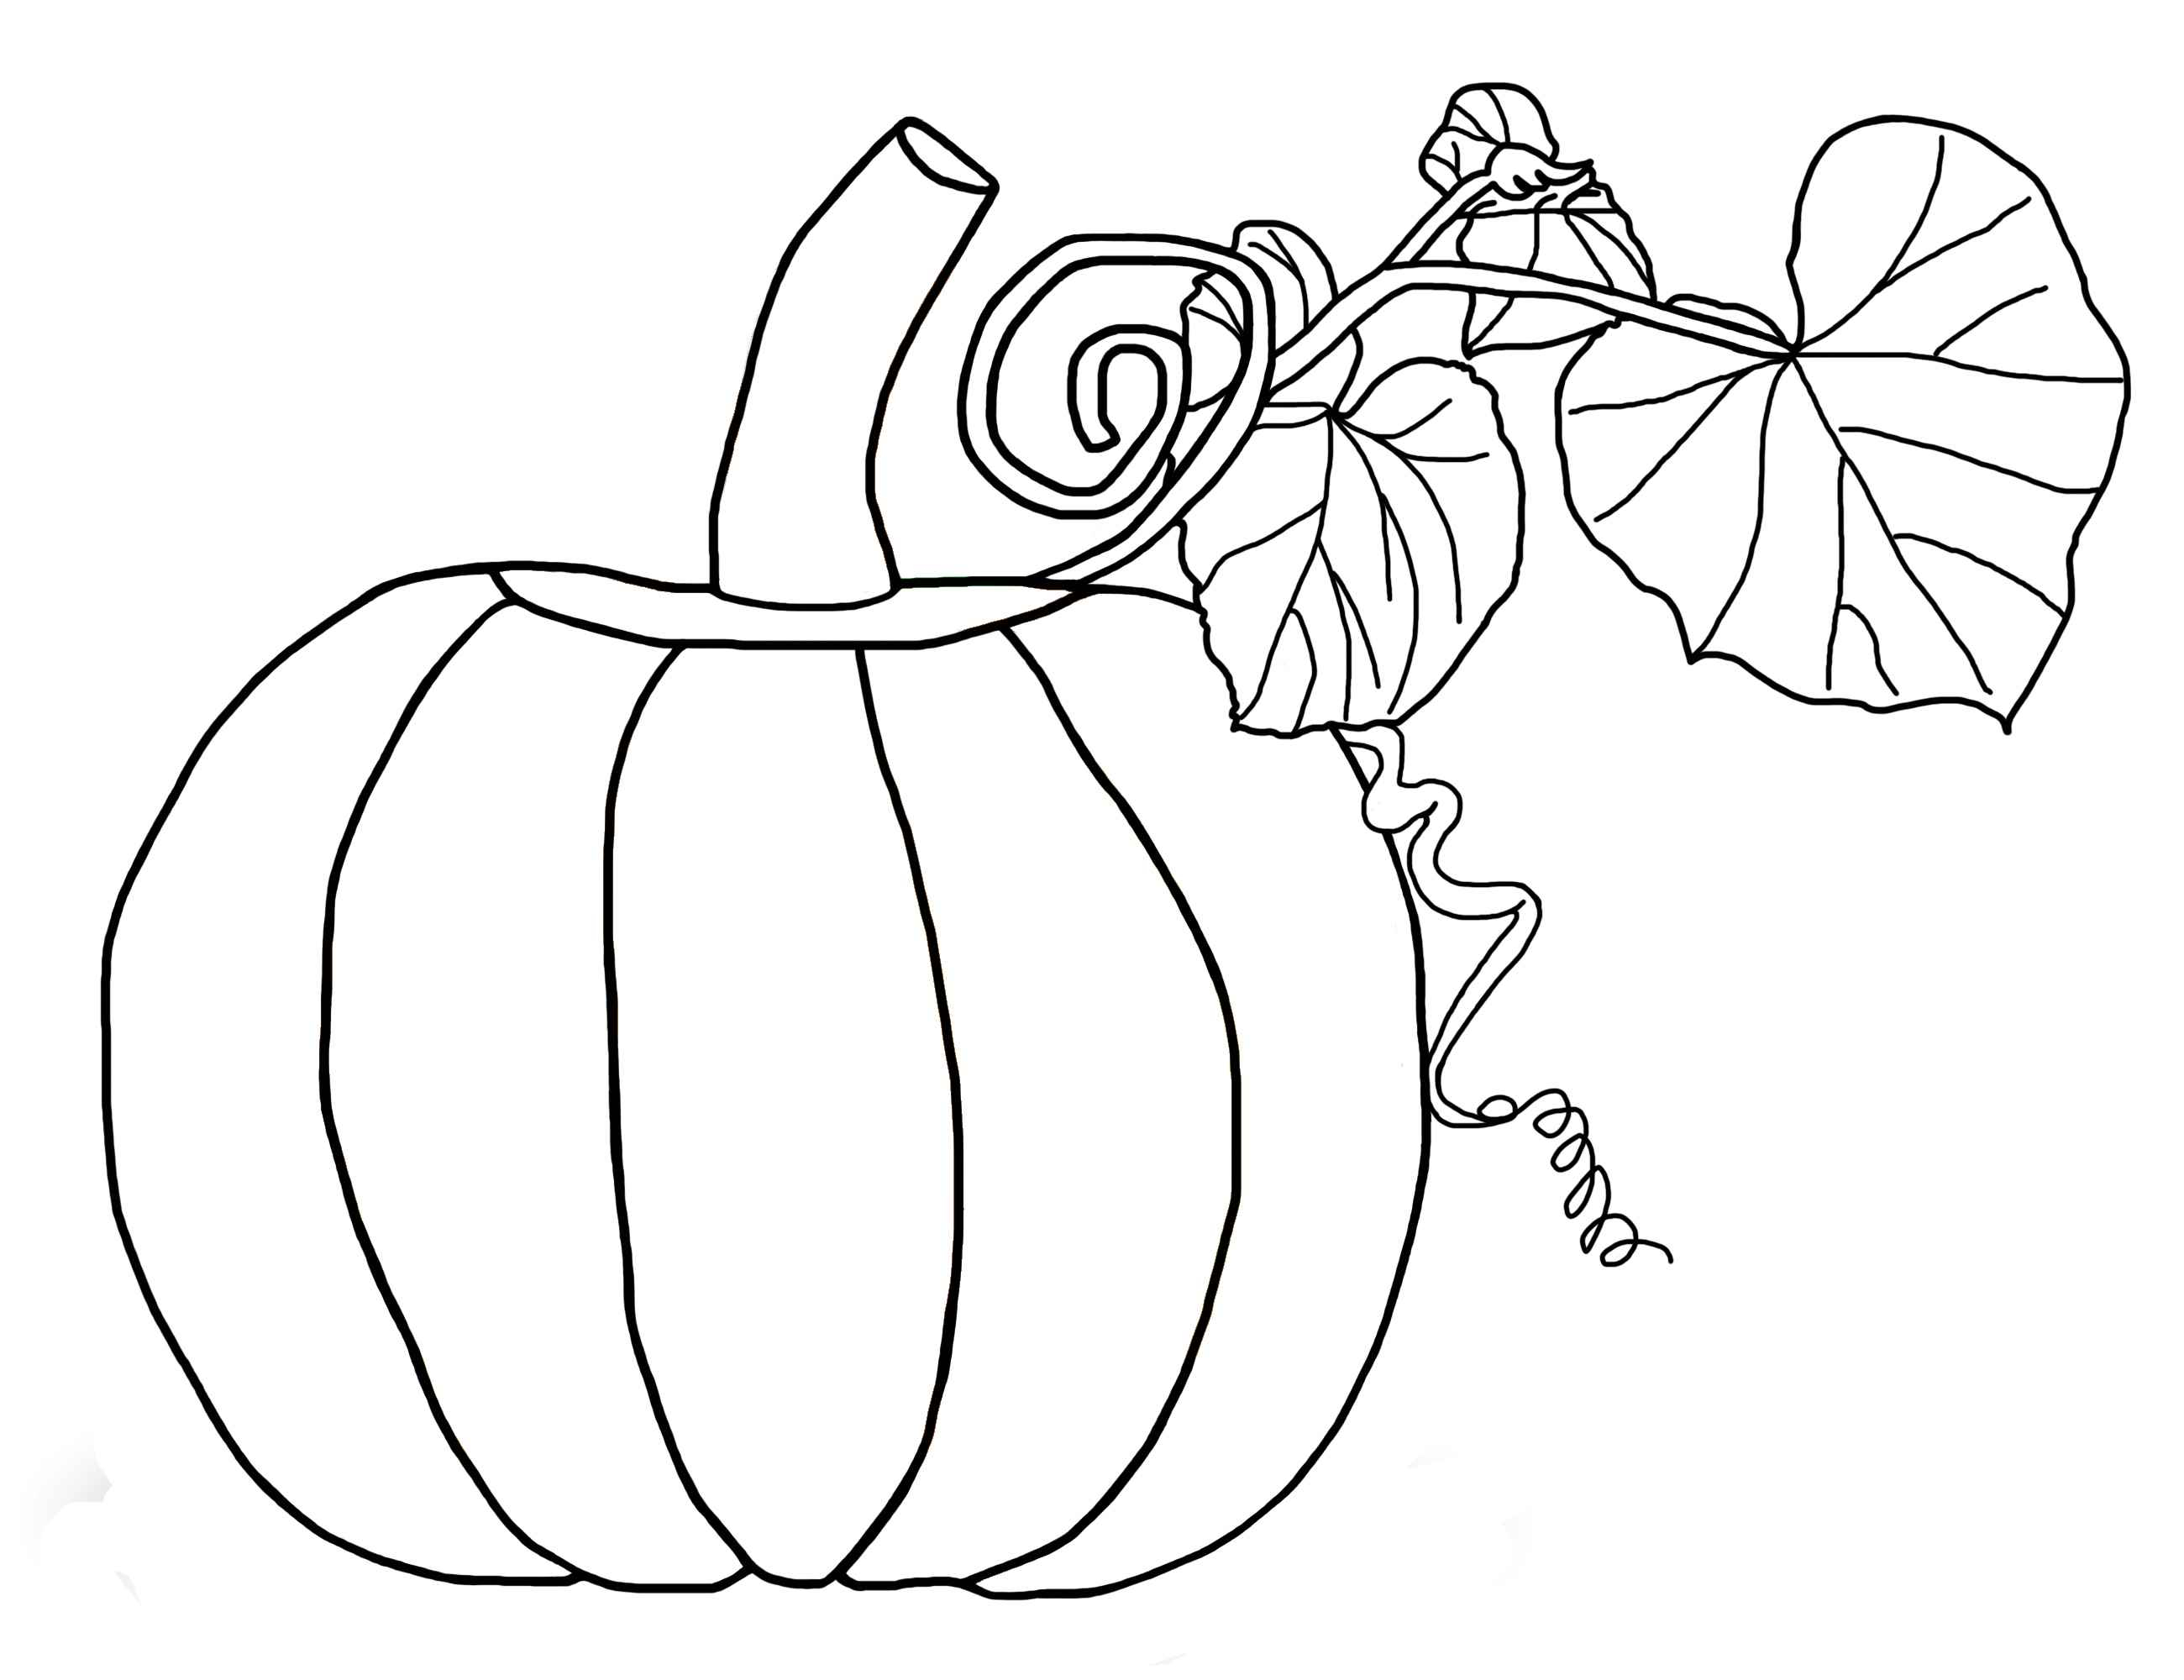 Happy Jack O Lantern Coloring Pages Free Pumpkin Coloring Pages For Kids